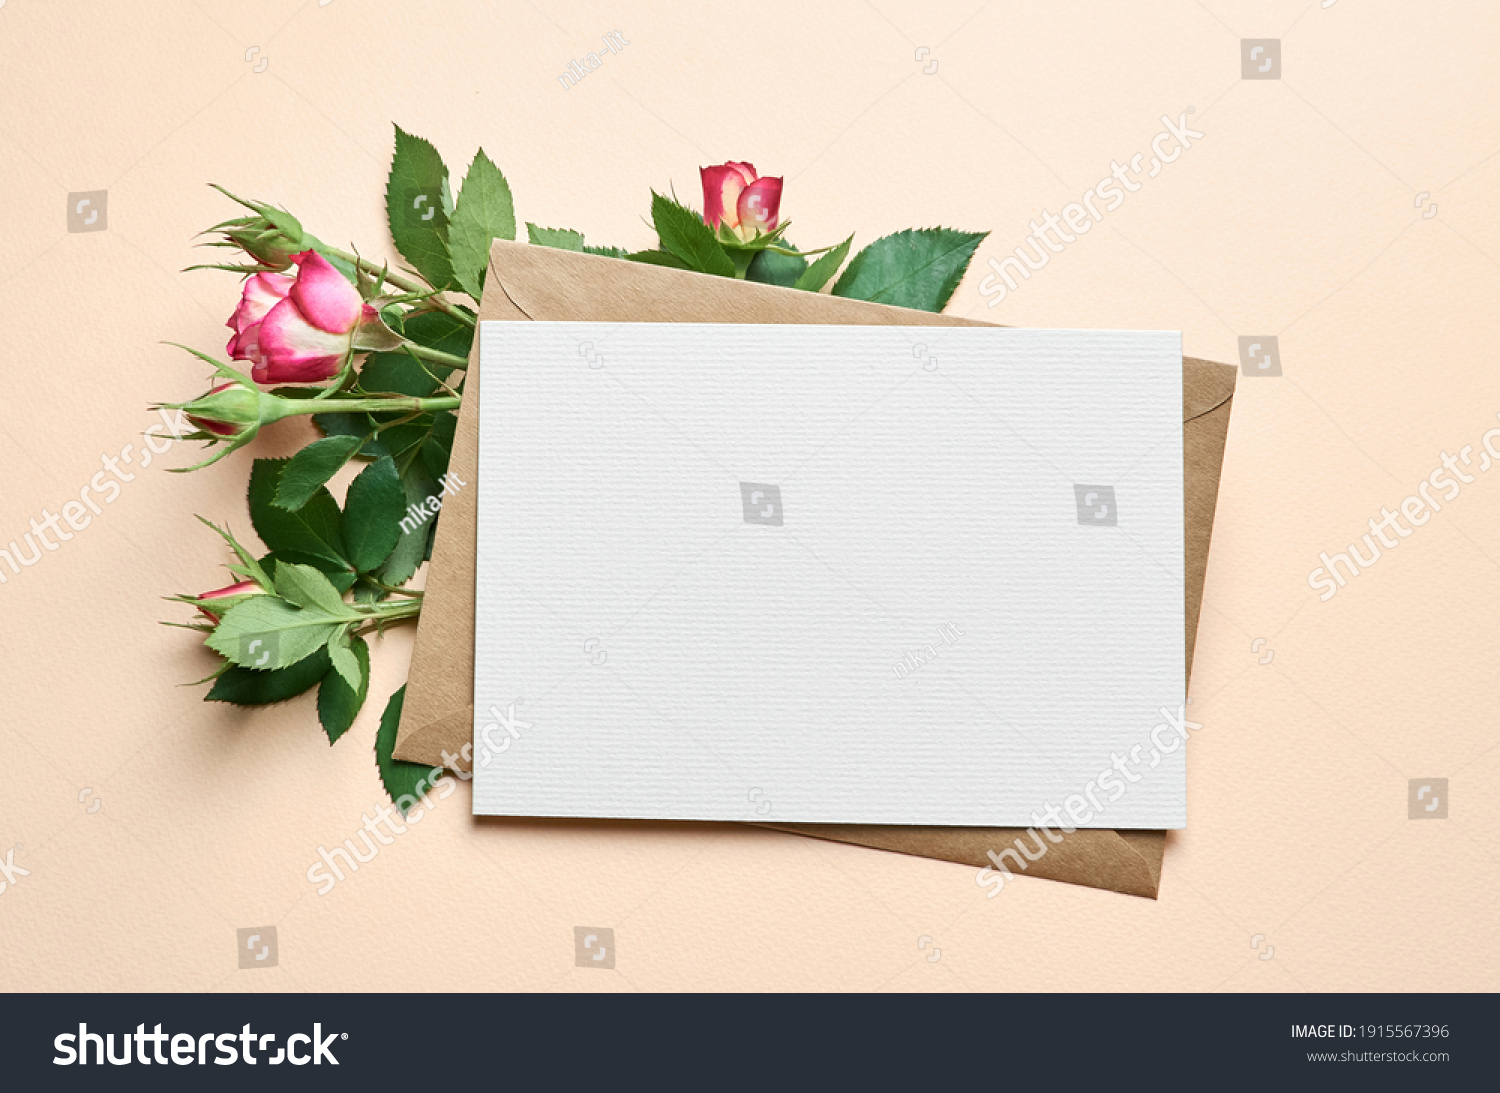 Greeting card with fresh roses flowers frame on paper background, card mockup with copy space #1915567396